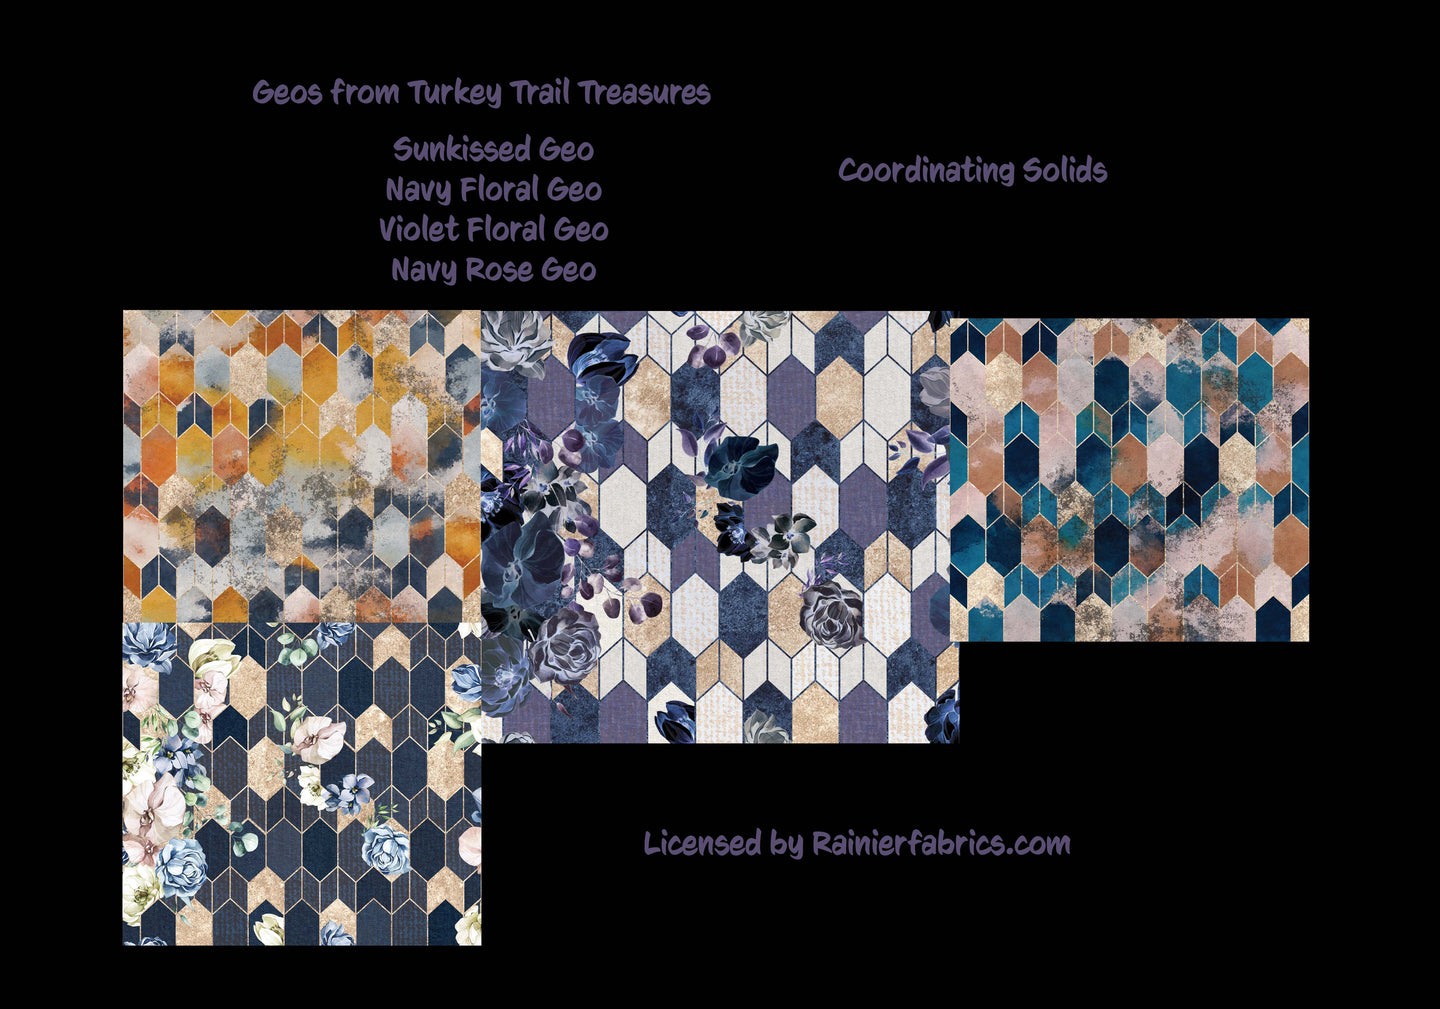 Geos from Turkey Trail Treasures - 2-5 day turnaround - Order by 1/2 yard; Description of bases below